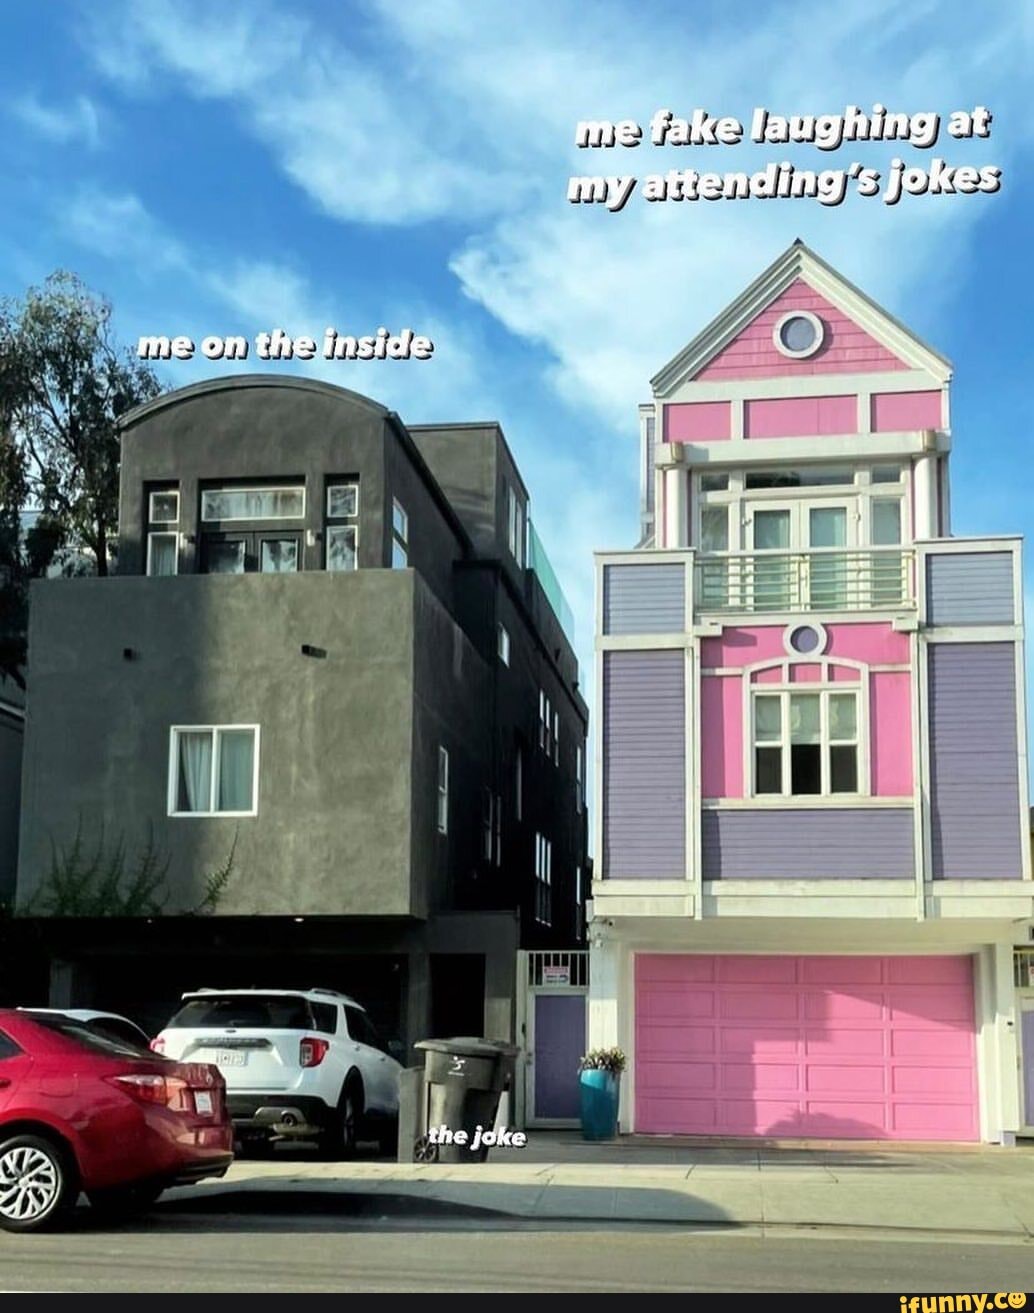 Black and pink house meme: Where are they? And who started the meme?